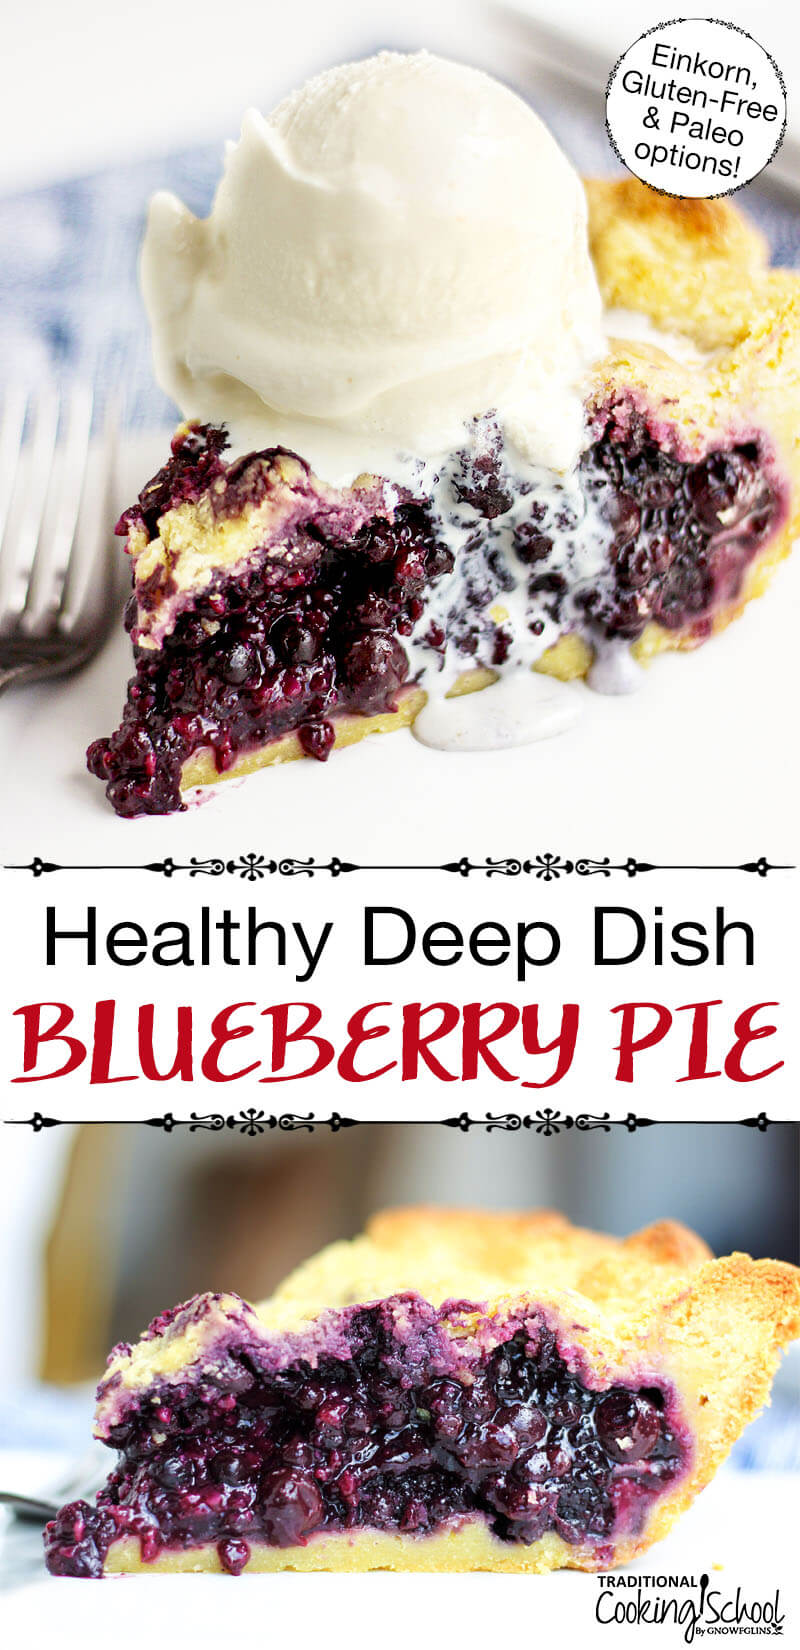 photo collage of a slice of blueberry pie with a scoop of vanilla ice cream in one of the photos, slowly oozing over the edge of the slice and onto the plate, with text overlay: "Healthy Deep Dish Blueberry Pie (Einkorn, Gluten-Free & Paleo options!)"